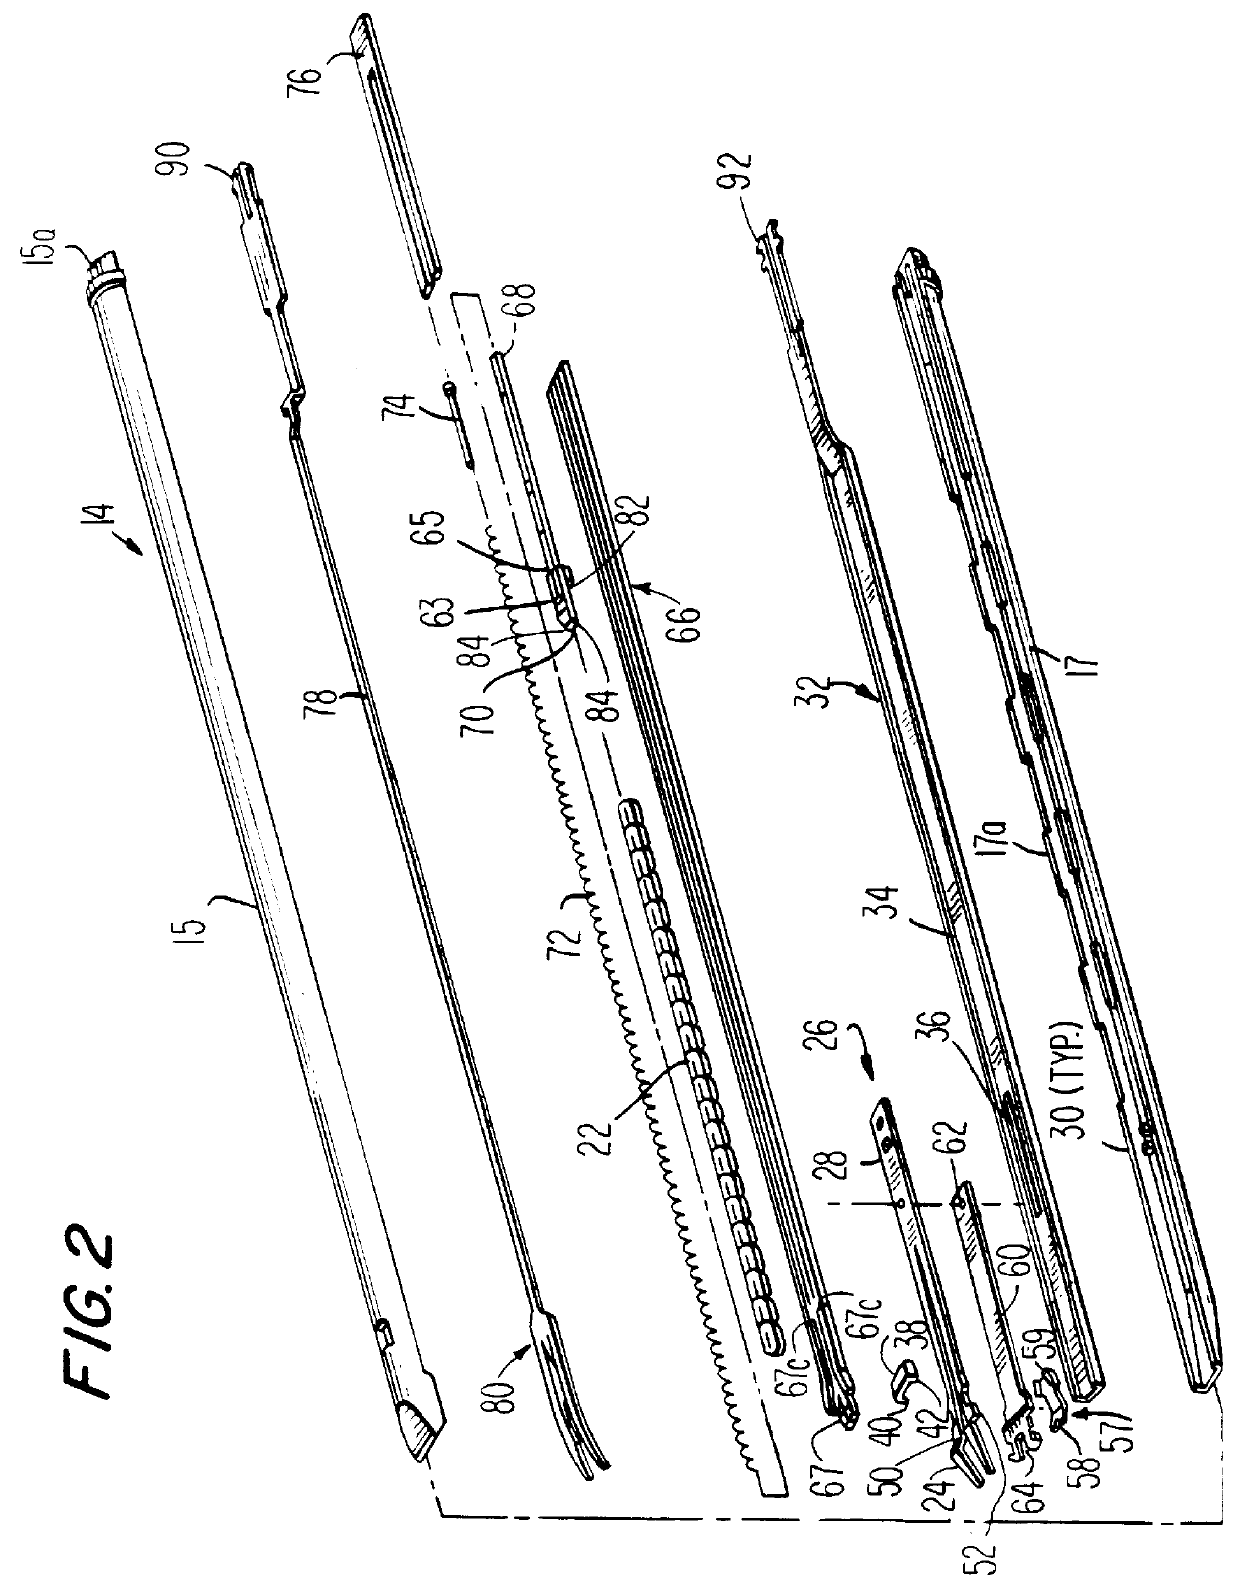 Apparatus and method for applying latchless surgical clips